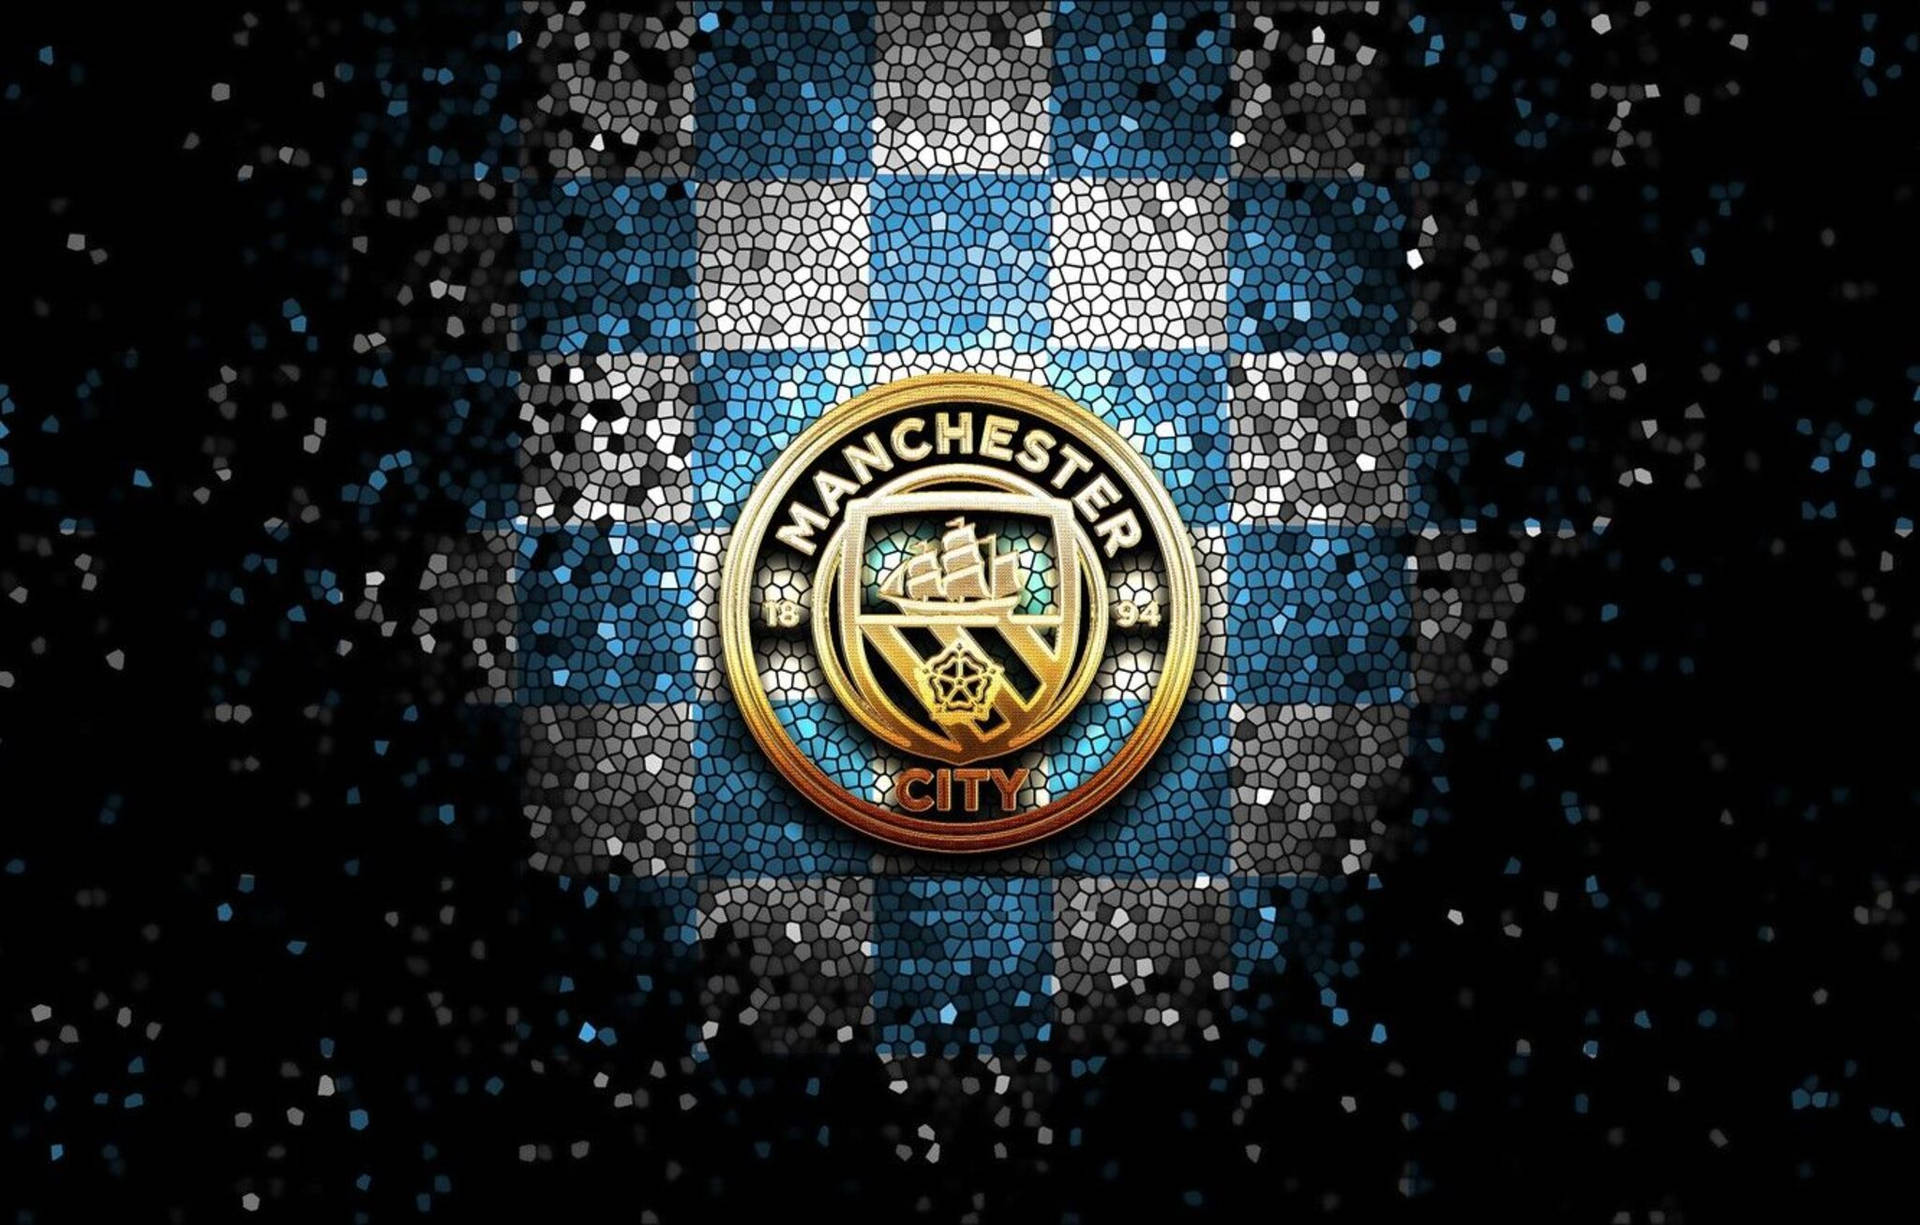 The Manchester City Logo Shines!